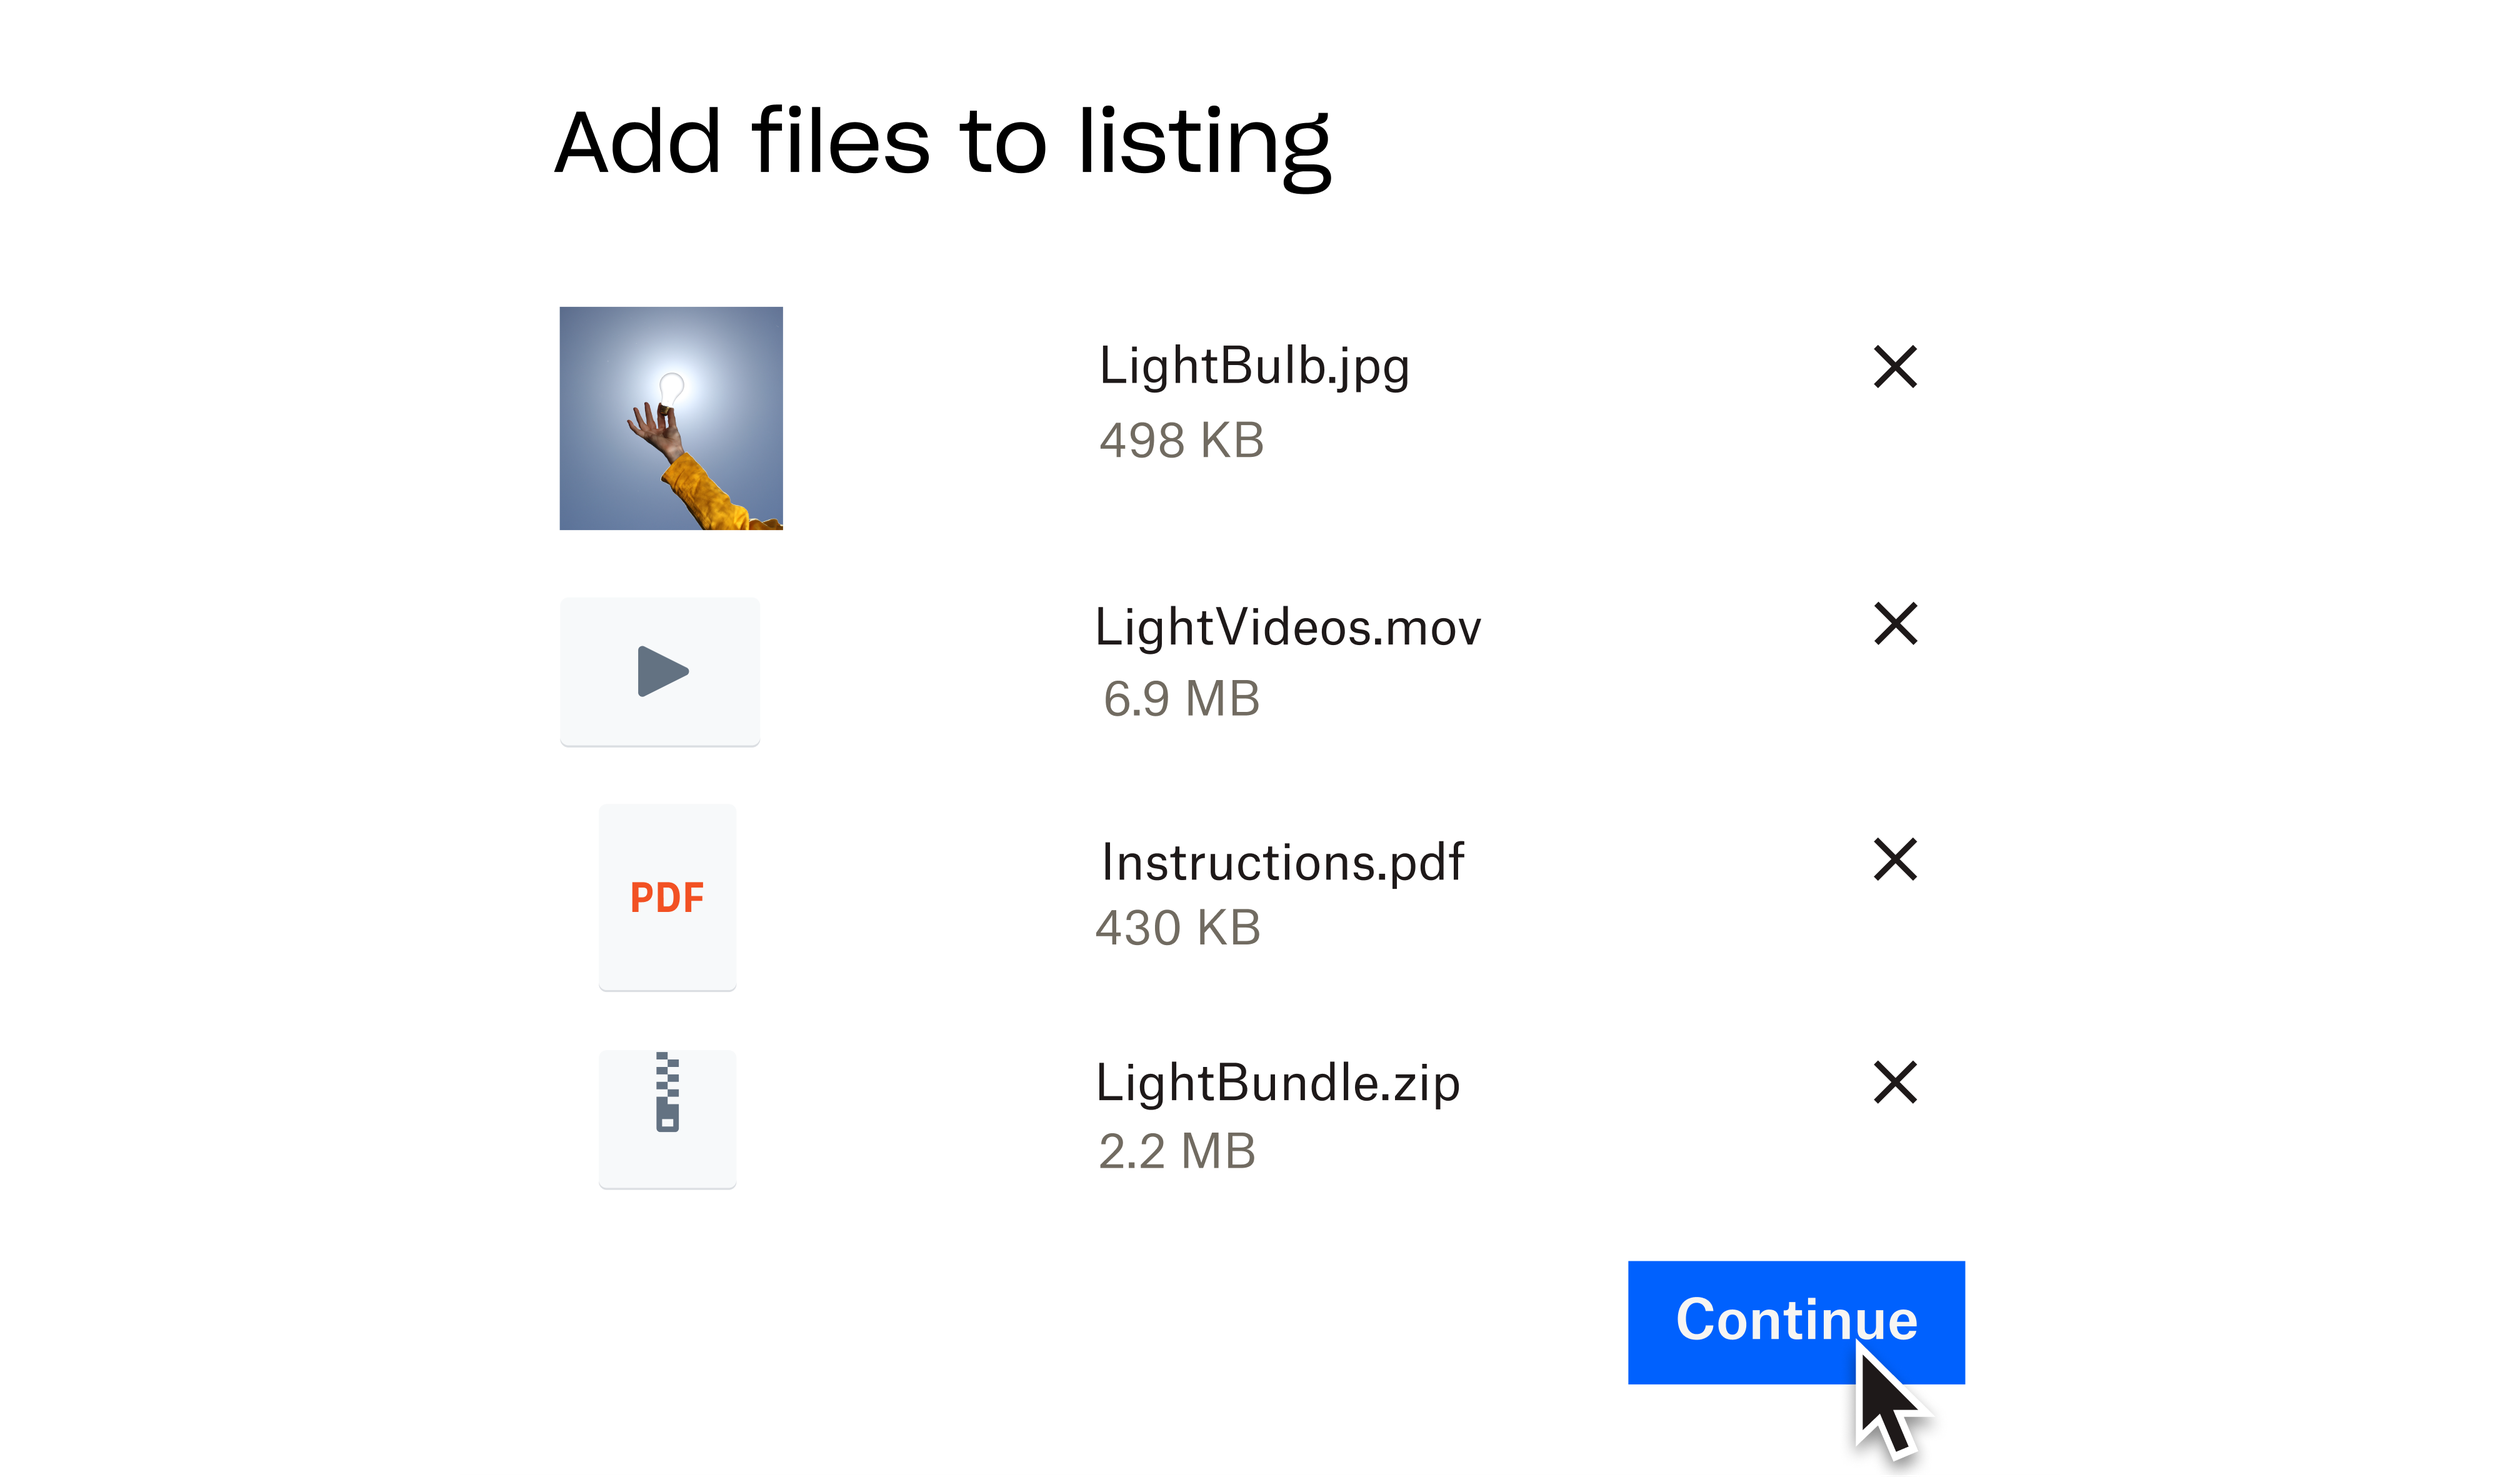 Adding files to a listing in Dropbox Shop.